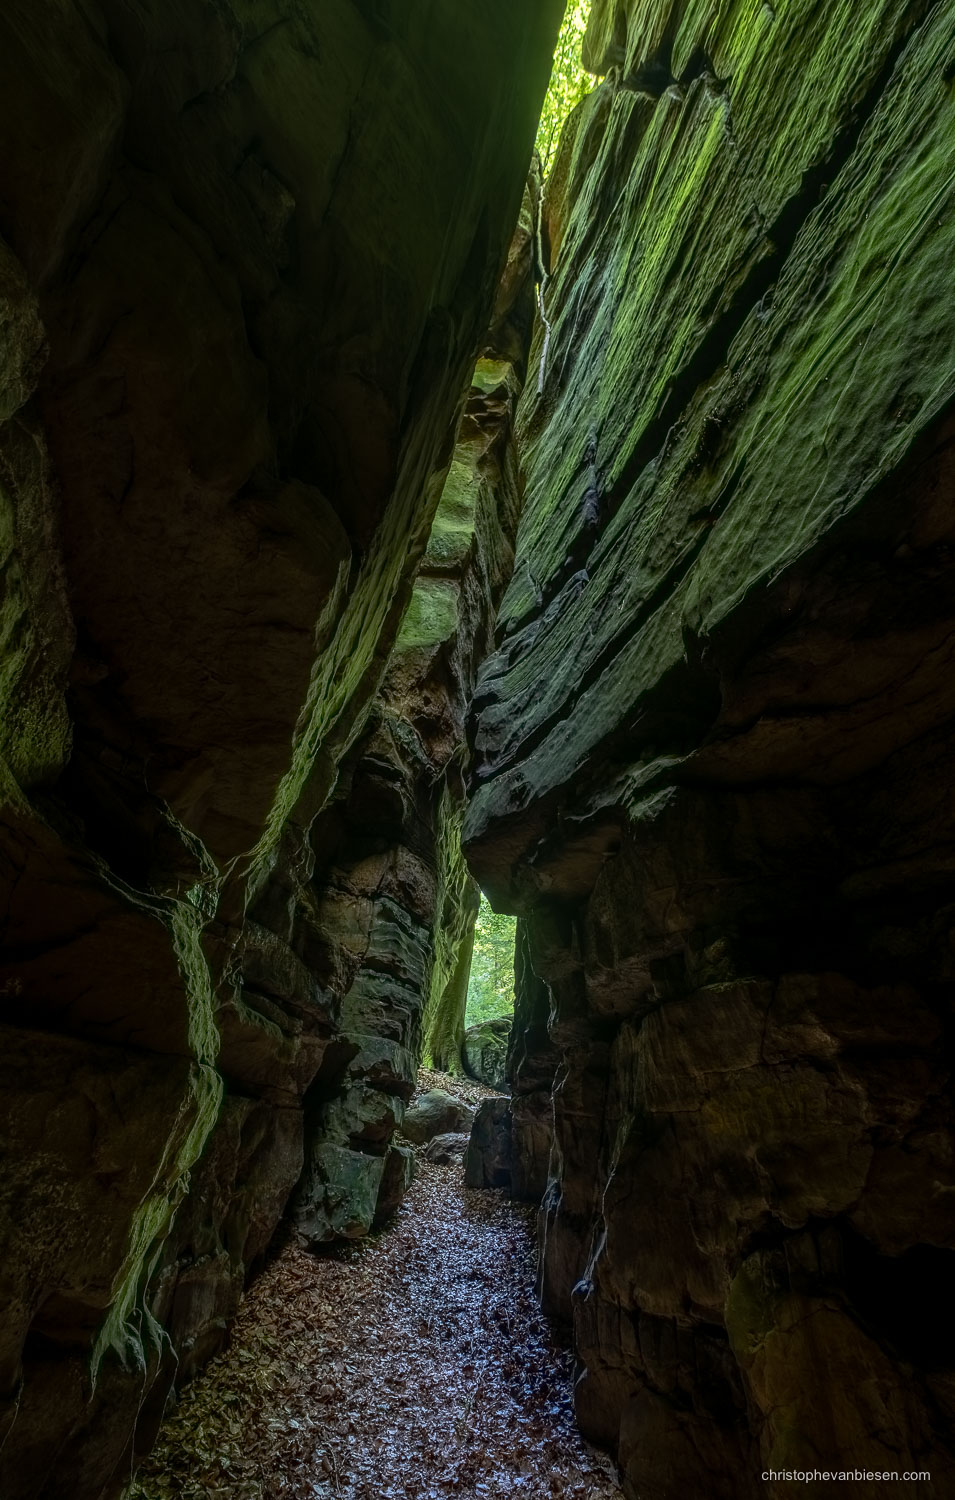 Visit the Mullerthal - Luxembourg - Narrow passage in the Mullerthal's Goldfralay caves in eastern Luxembourg - Green Canyon